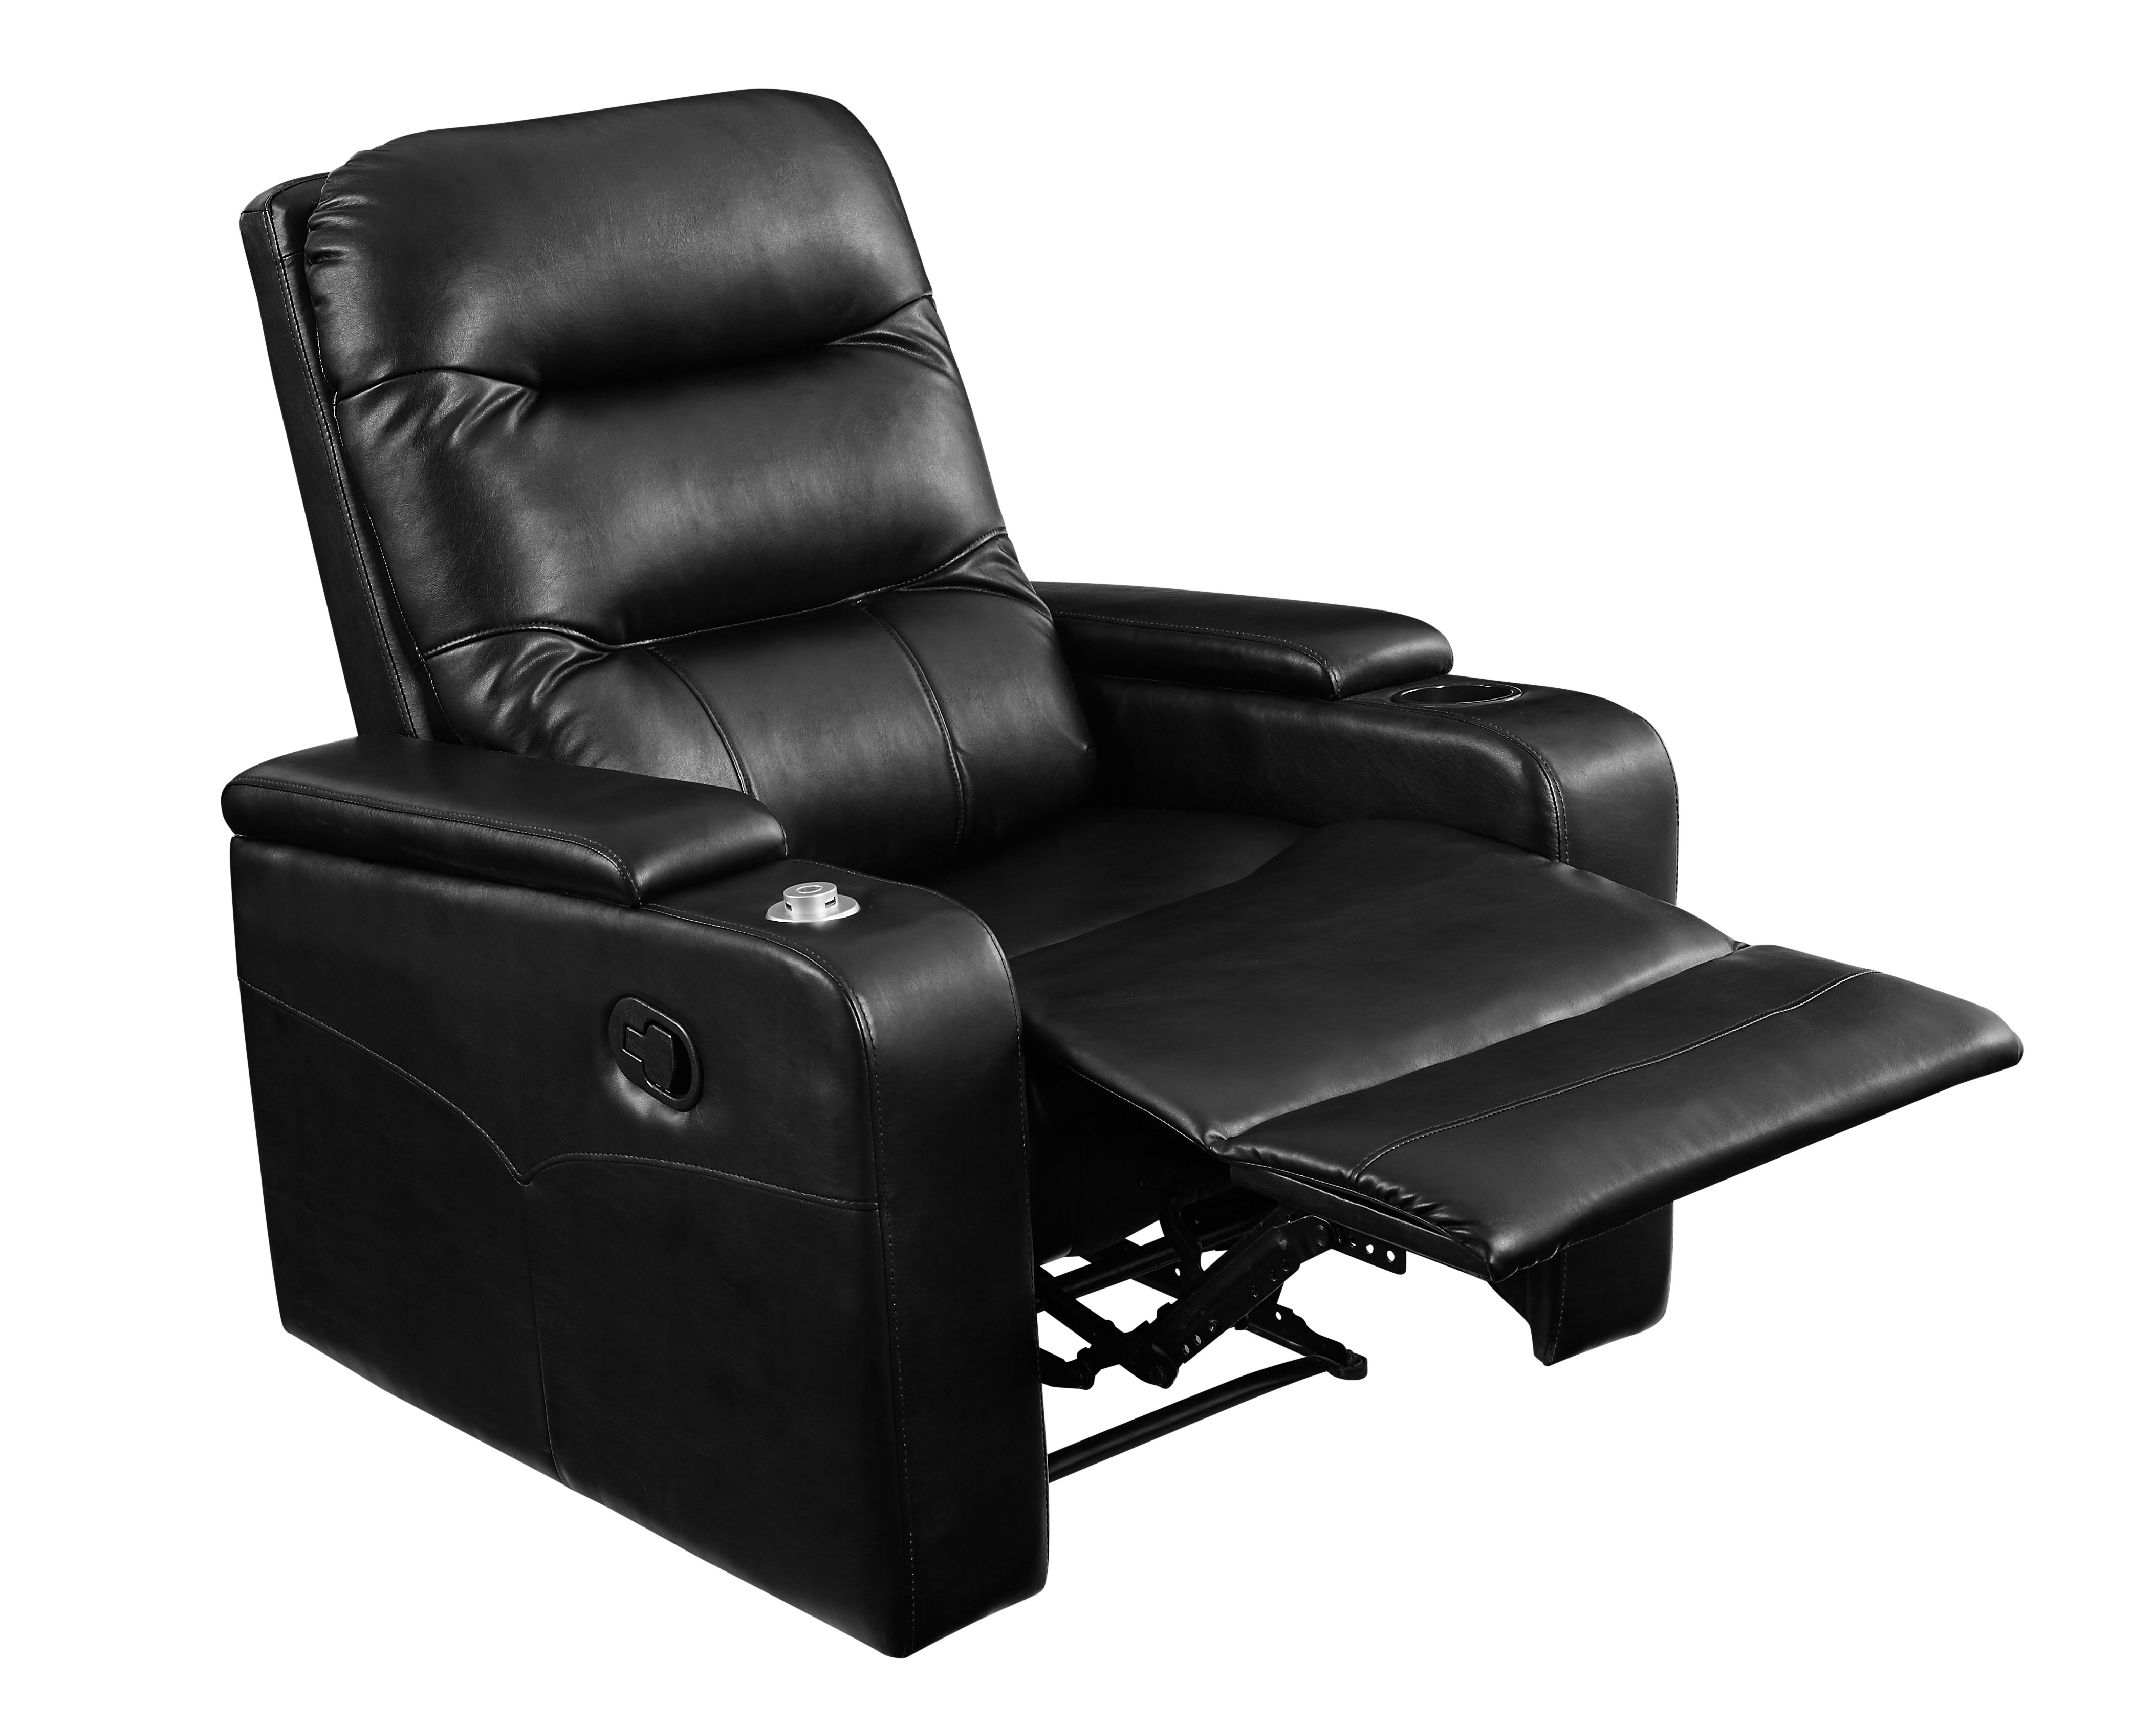 Relax-a-Lounger Lilac Manual Standard Recliner, Black Fabric - image 3 of 16